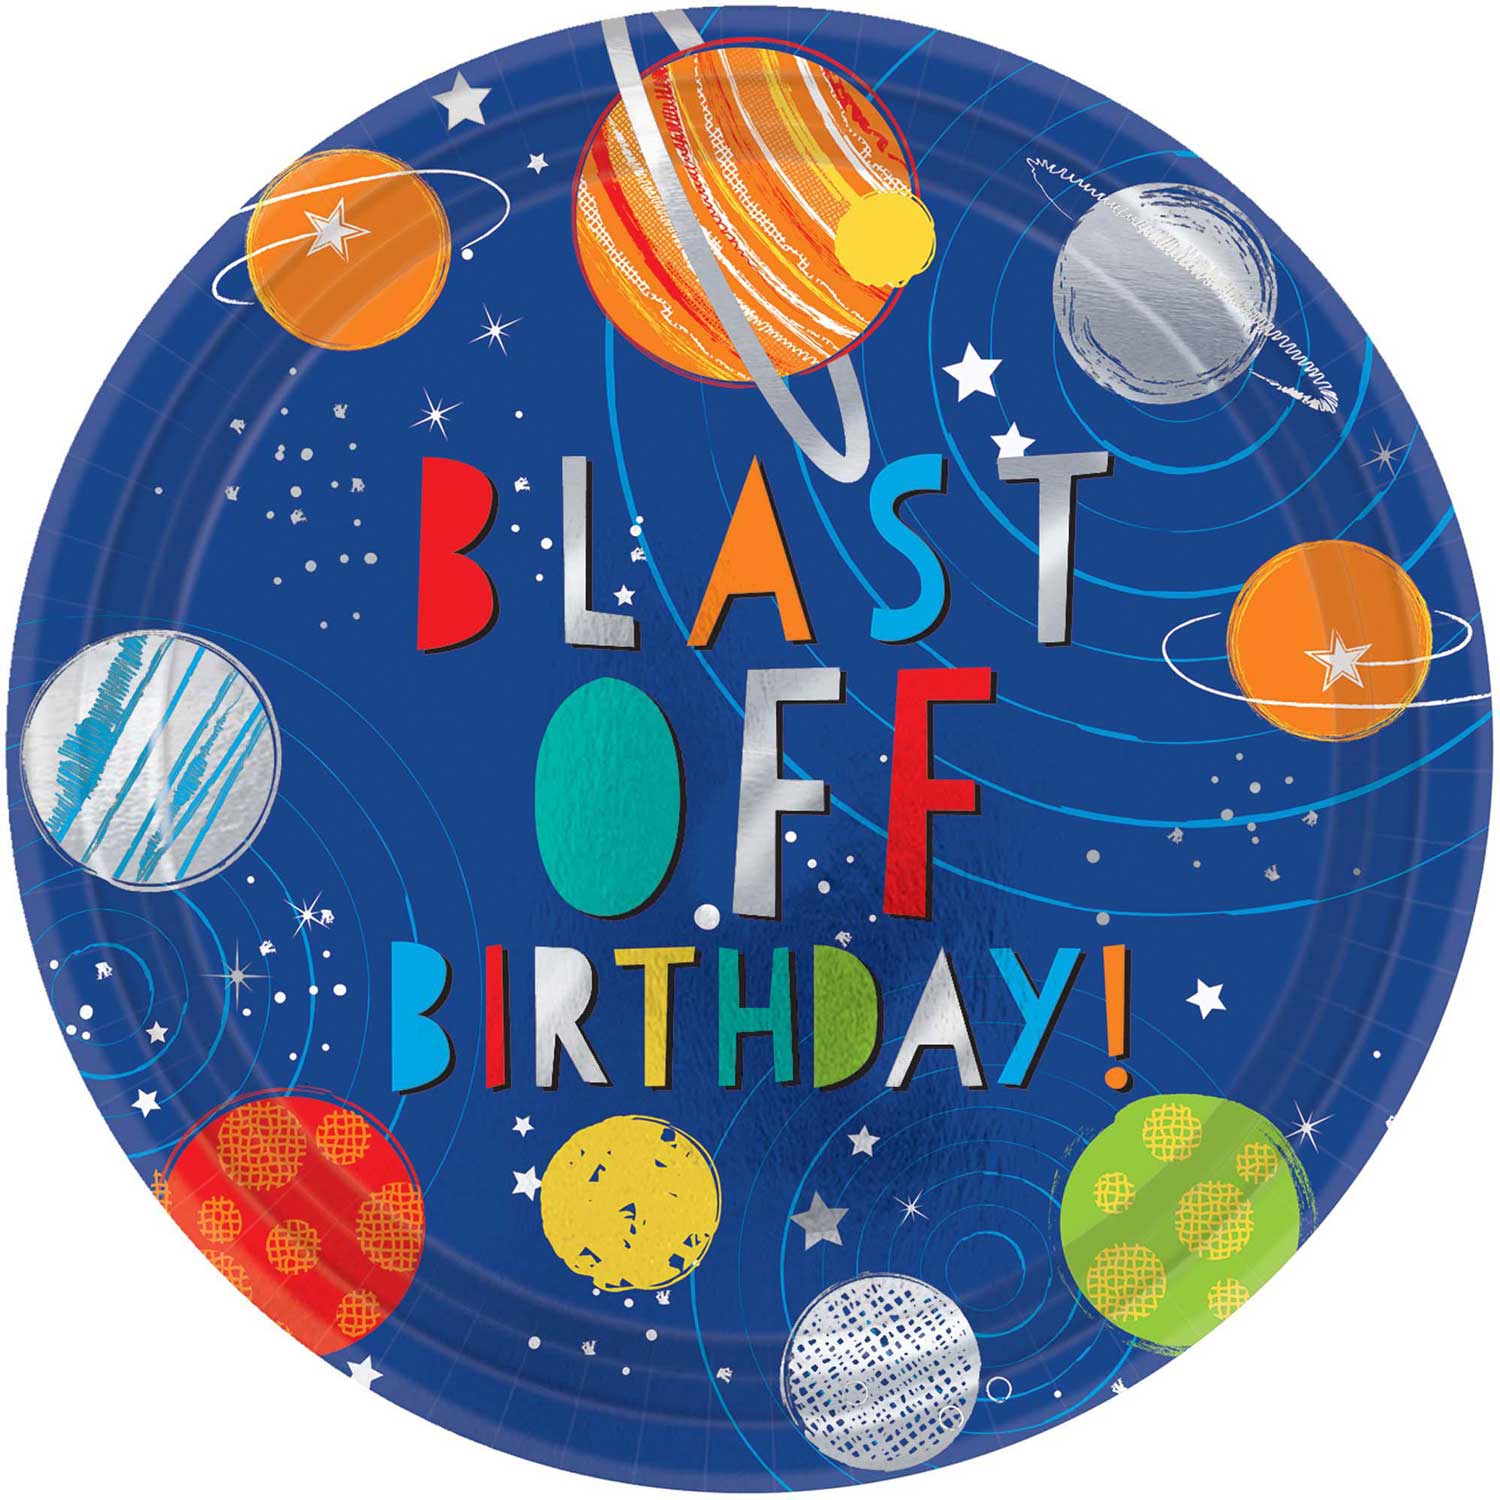 Blast Off Birthday Metallic Paper Plates 10.5in, 8pcs Printed Tableware - Party Centre